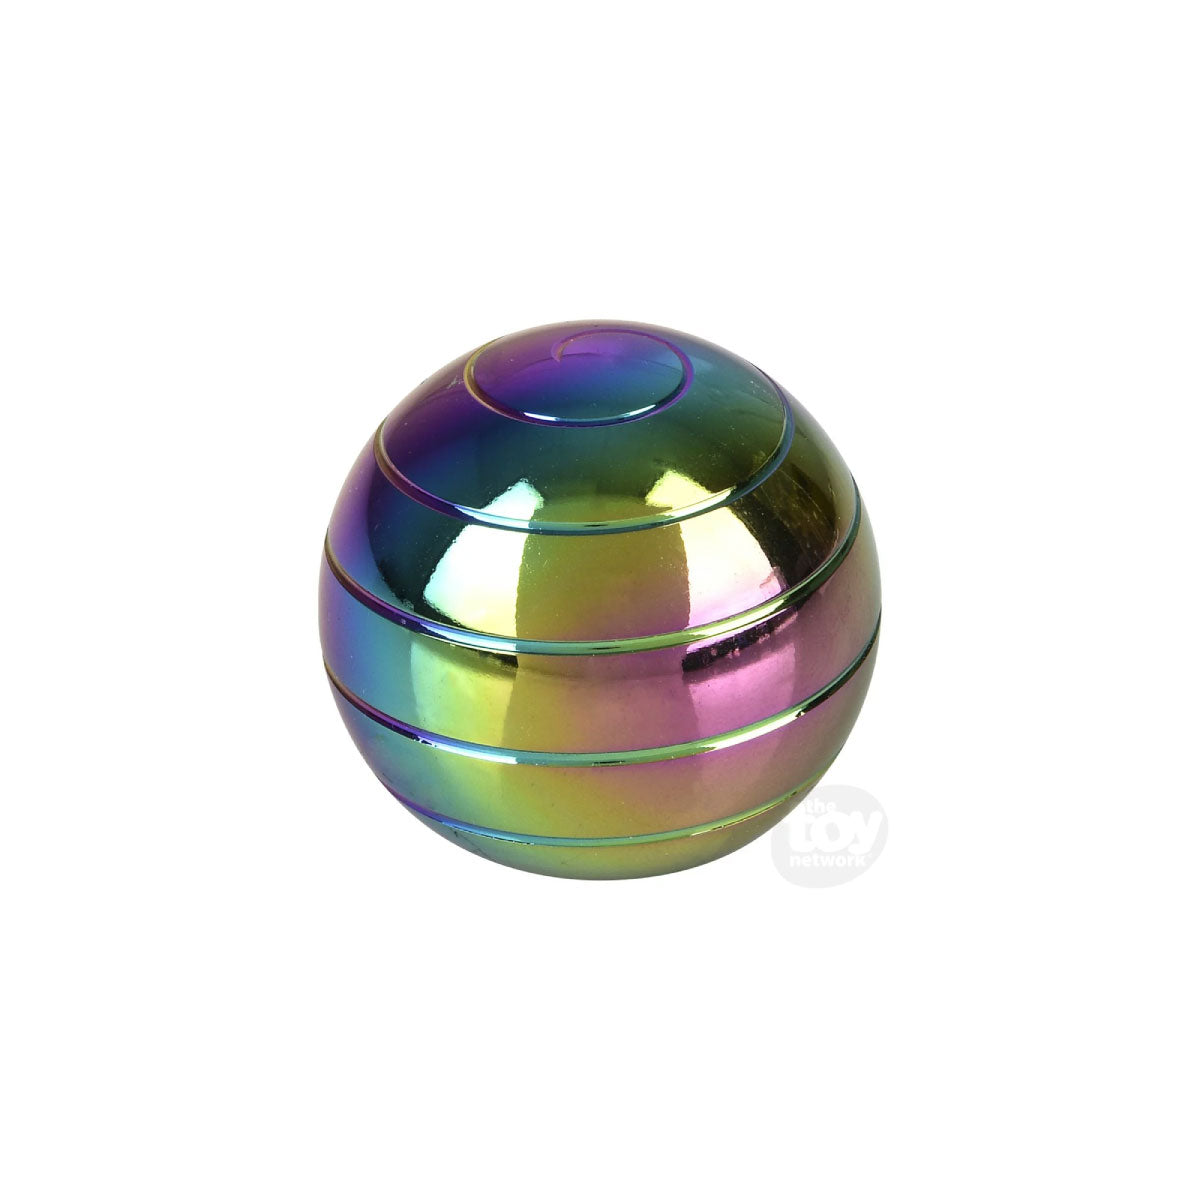 Rainbow Gyroscope Sphere - 1.5” from The Toy Network